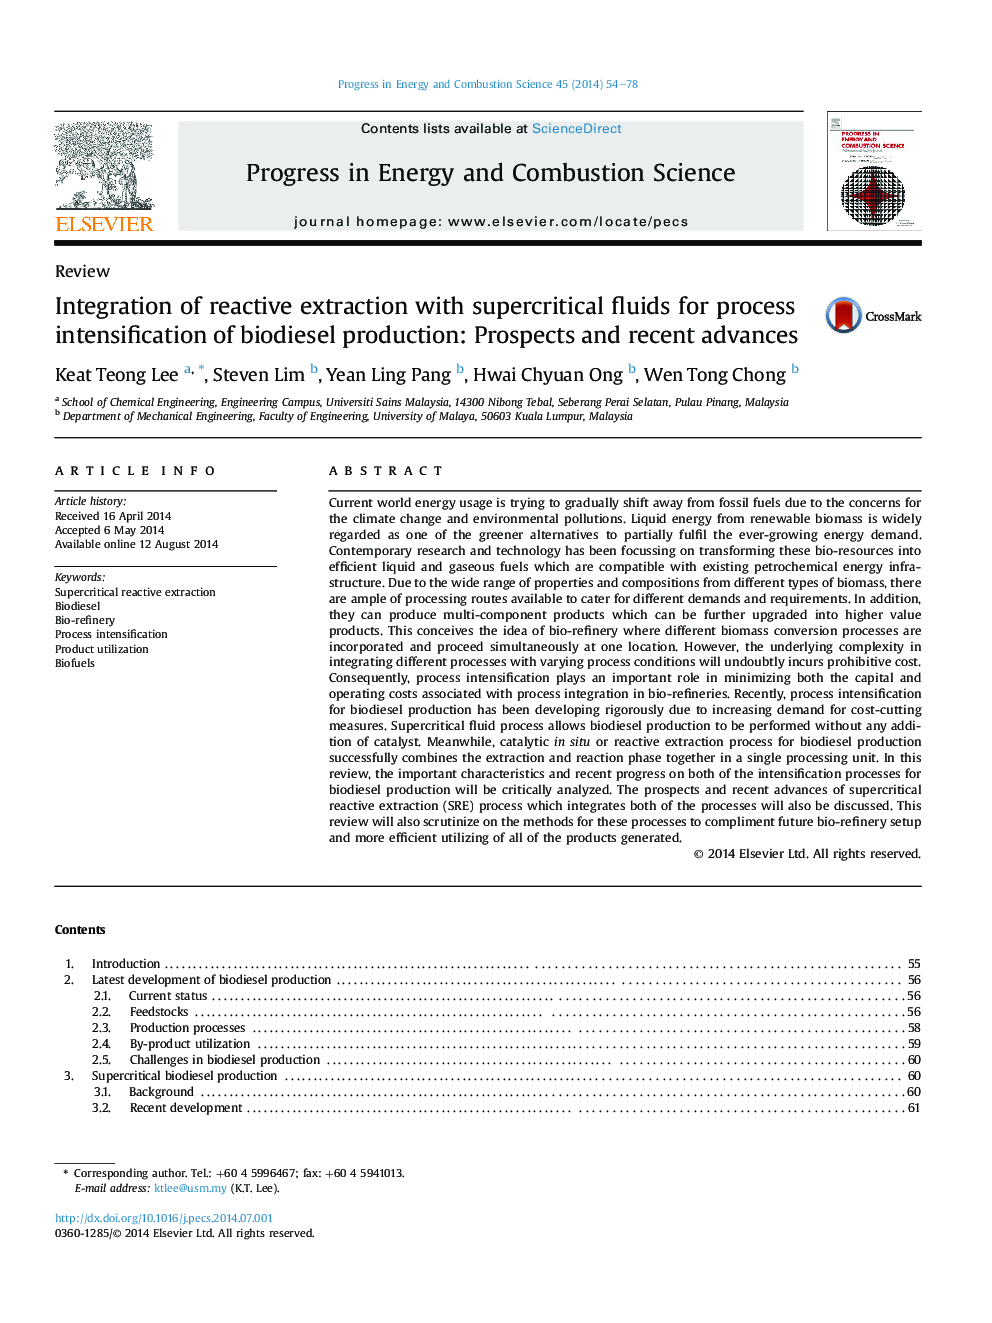 Integration of reactive extraction with supercritical fluids for process intensification of biodiesel production: Prospects and recent advances